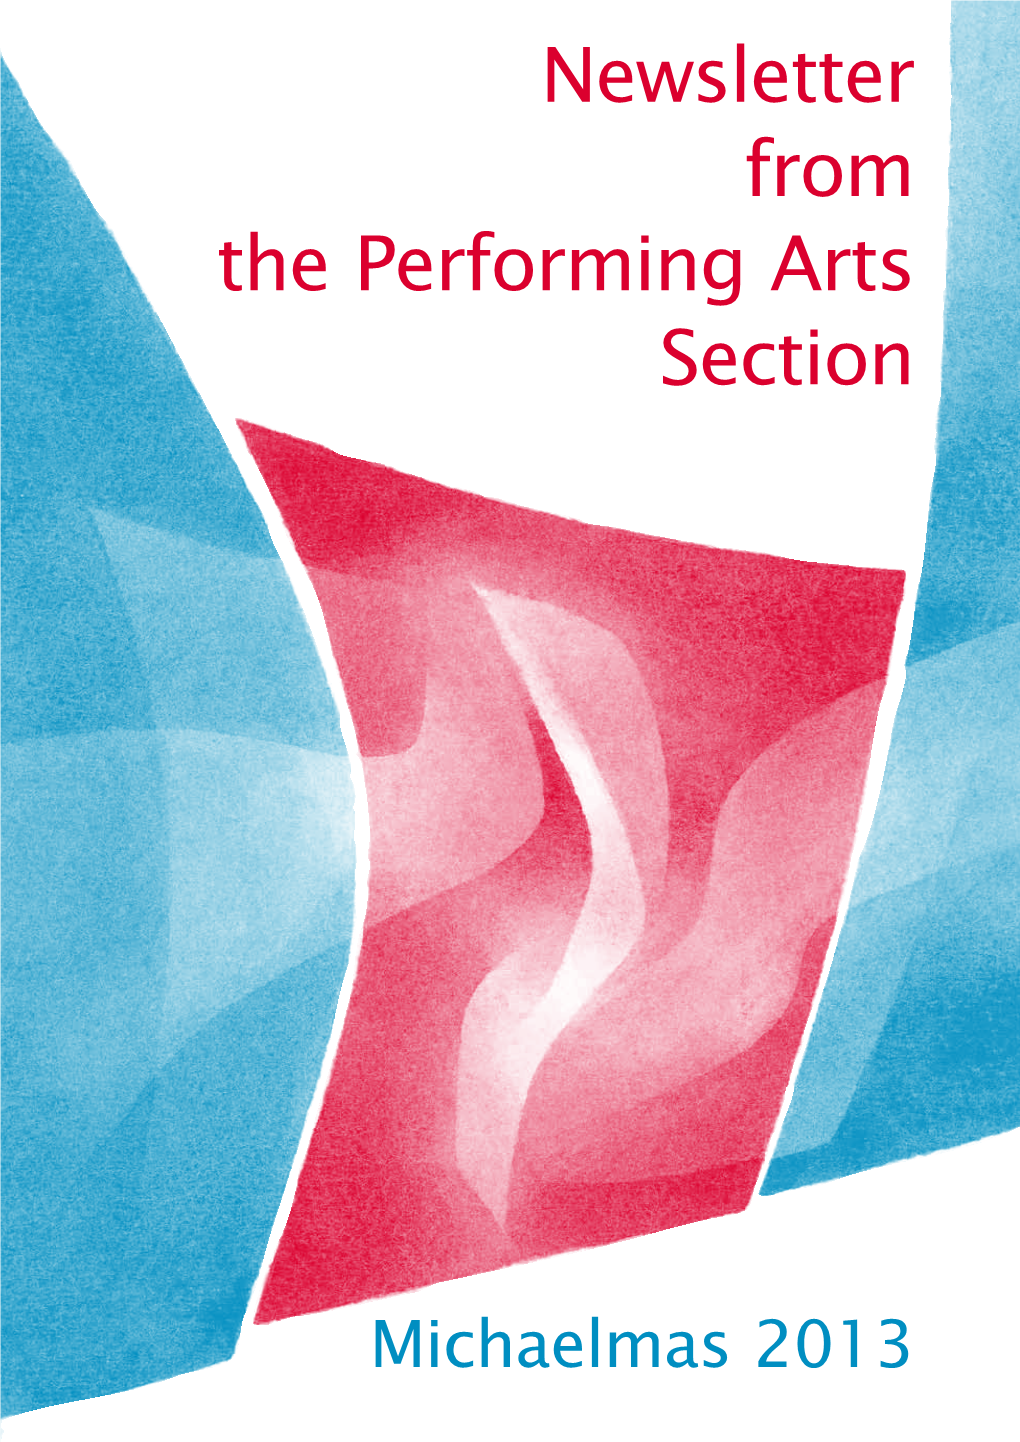 Newsletter from the Performing Arts Section